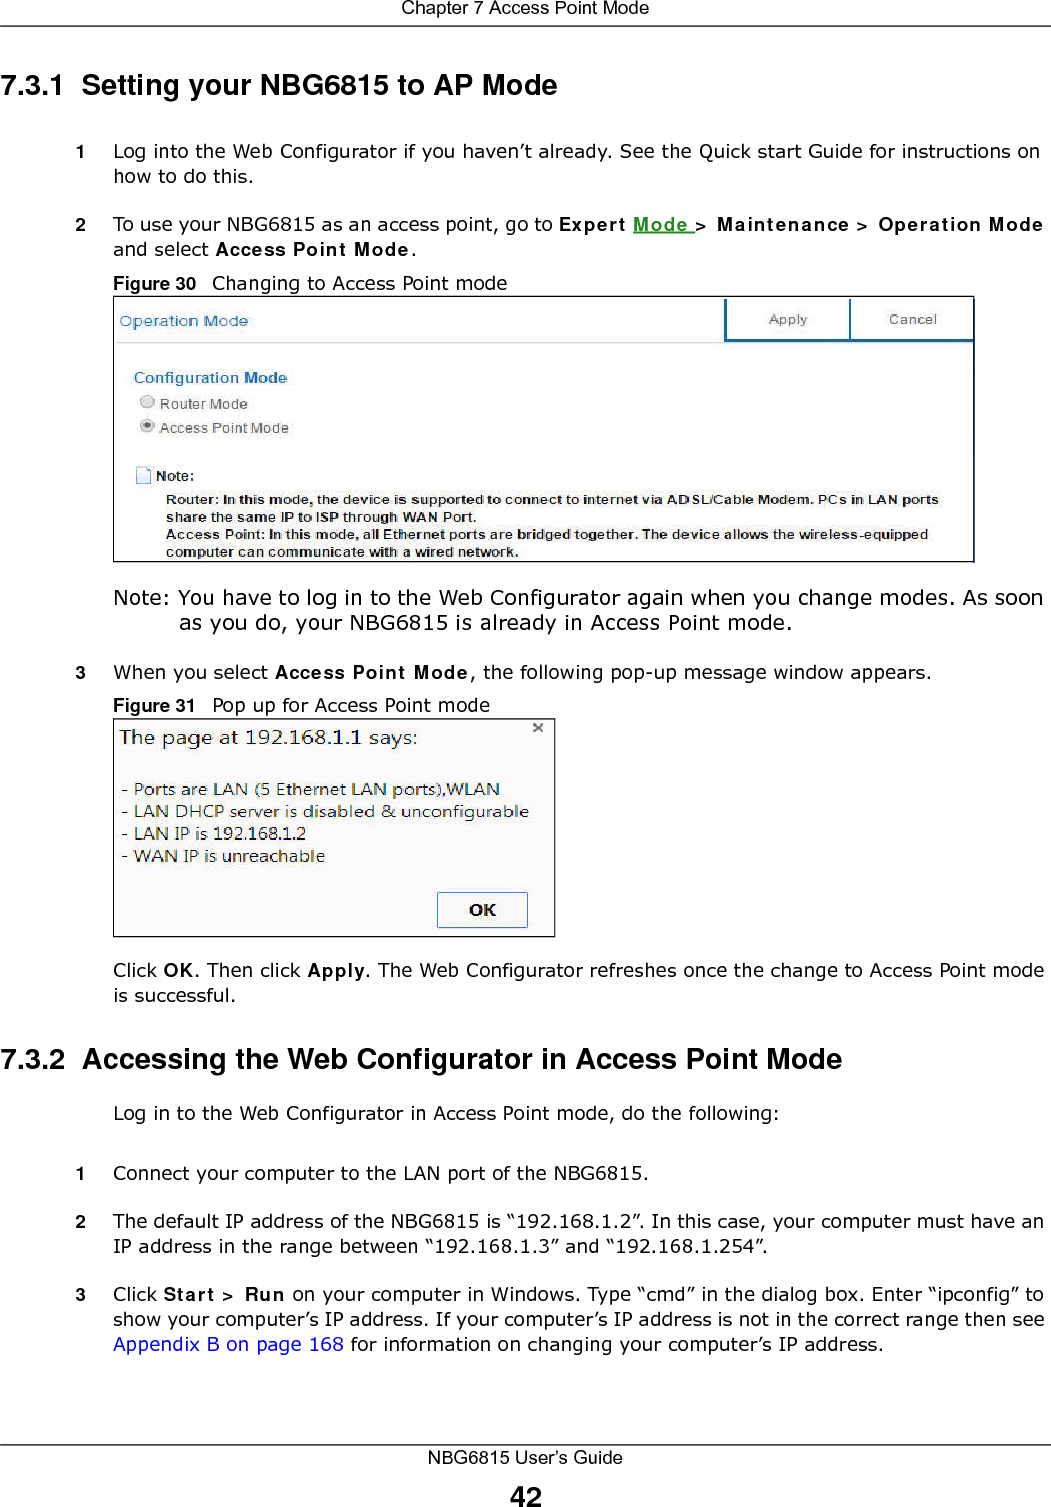 Chapter 7 Access Point ModeNBG6815 User’s Guide427.3.1  Setting your NBG6815 to AP Mode1Log into the Web Configurator if you haven’t already. See the Quick start Guide for instructions on how to do this.2To use your NBG6815 as an access point, go to Expert Mode &gt; Maintenance &gt; Operation Mode and select Access Point Mode. Figure 30   Changing to Access Point modeNote: You have to log in to the Web Configurator again when you change modes. As soon as you do, your NBG6815 is already in Access Point mode.3When you select Access Point Mode, the following pop-up message window appears.Figure 31   Pop up for Access Point mode Click OK. Then click Apply. The Web Configurator refreshes once the change to Access Point mode is successful.7.3.2  Accessing the Web Configurator in Access Point ModeLog in to the Web Configurator in Access Point mode, do the following:1Connect your computer to the LAN port of the NBG6815. 2The default IP address of the NBG6815 is “192.168.1.2”. In this case, your computer must have an IP address in the range between “192.168.1.3” and “192.168.1.254”.3Click Start &gt; Run on your computer in Windows. Type “cmd” in the dialog box. Enter “ipconfig” to show your computer’s IP address. If your computer’s IP address is not in the correct range then see Appendix B on page 168 for information on changing your computer’s IP address.